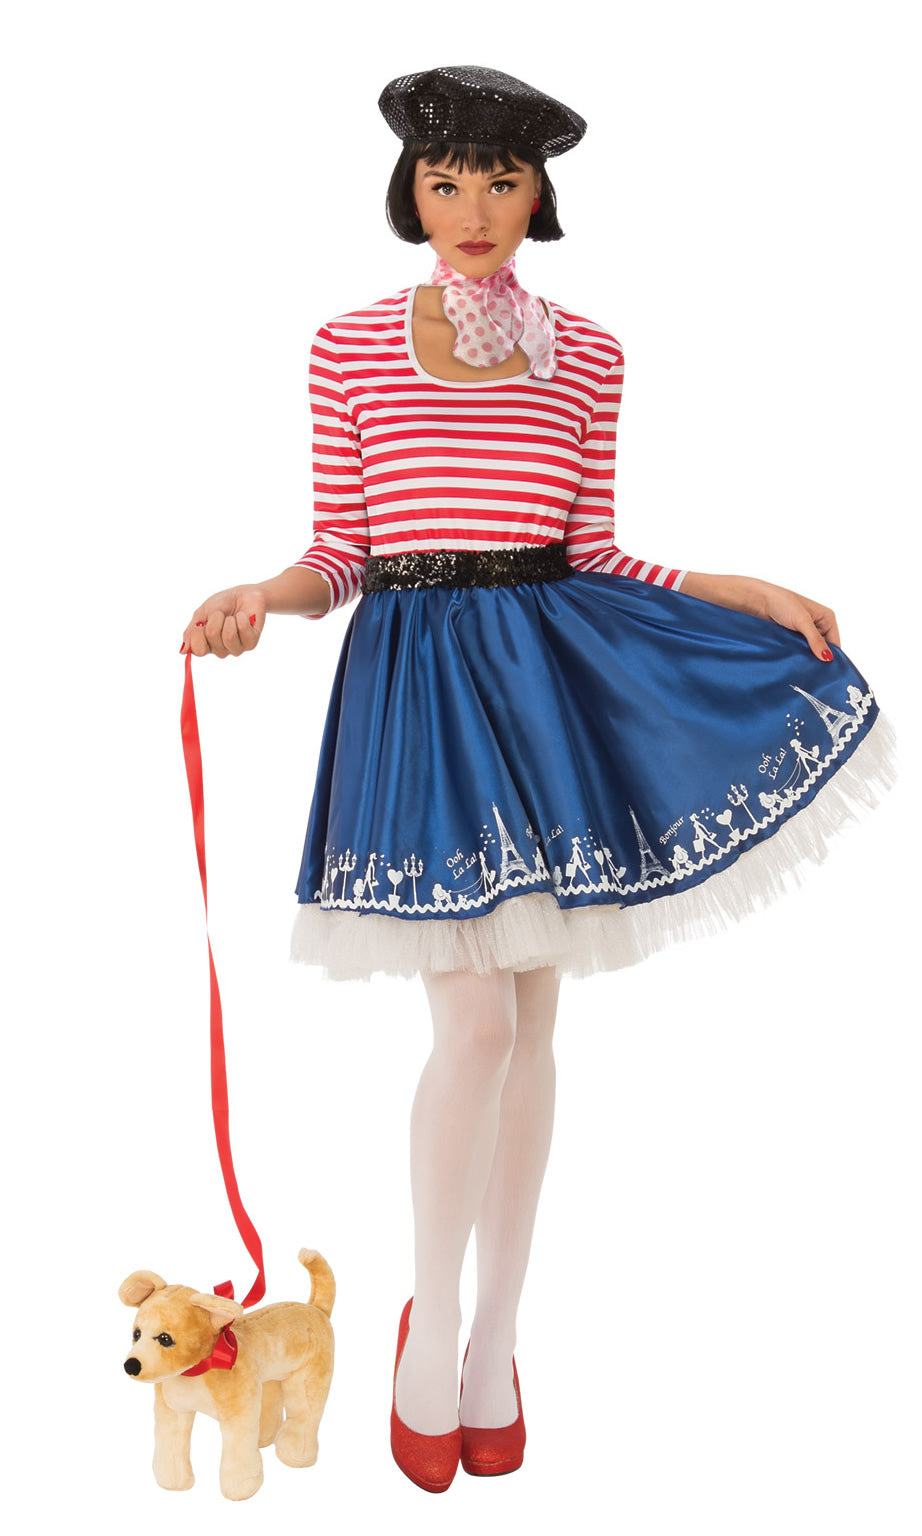 French lady dress with red and white striped dress with black beret and toy dog